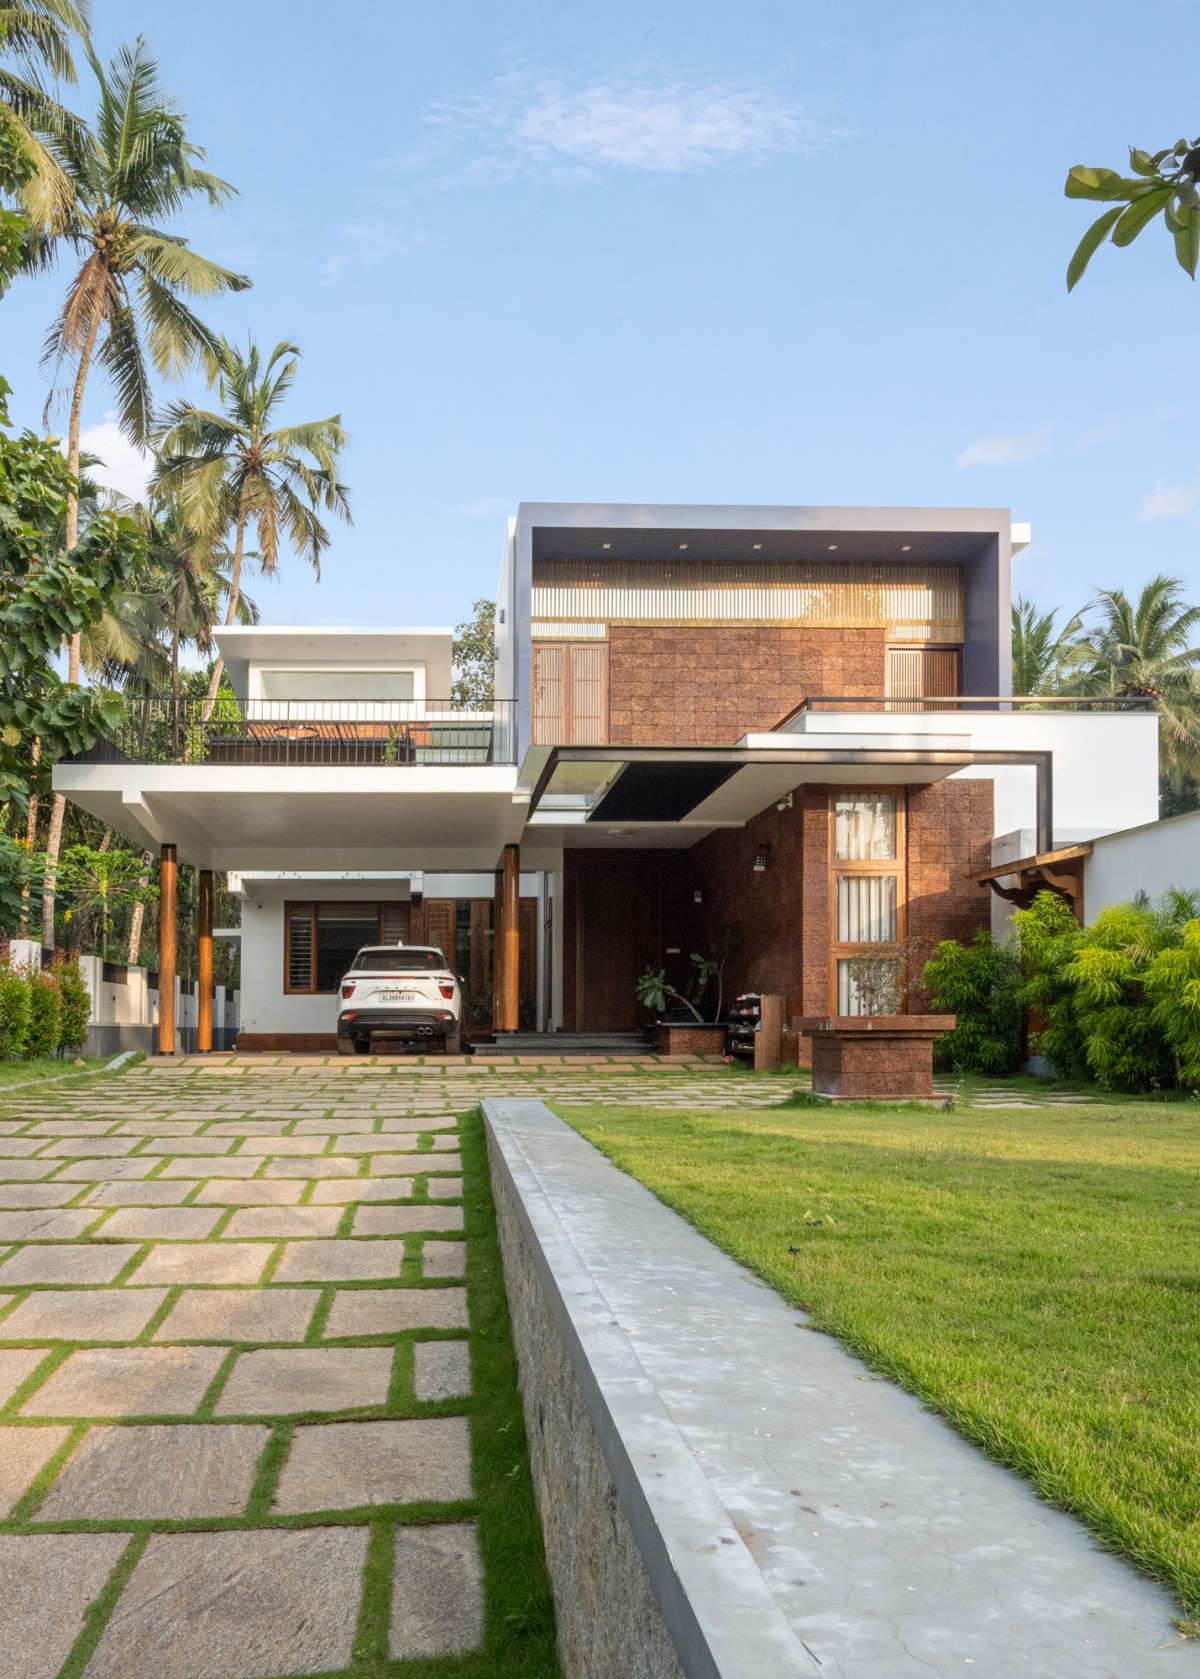 Exterior view of The Frangipani House by Designature Architects